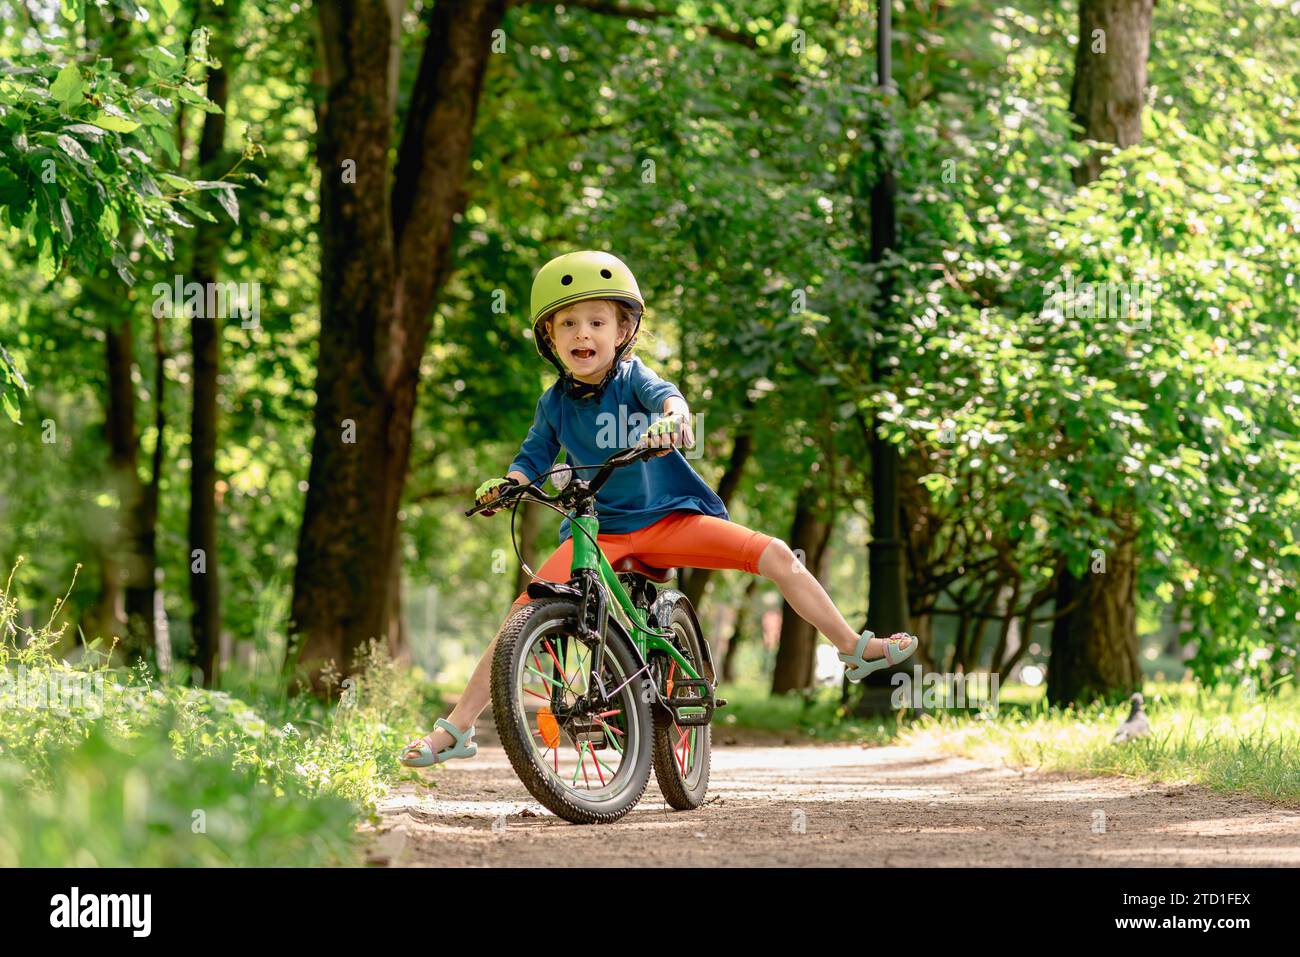 A child learning to ride a bicycle is unable to maintain balance and falls down. Stock Photo